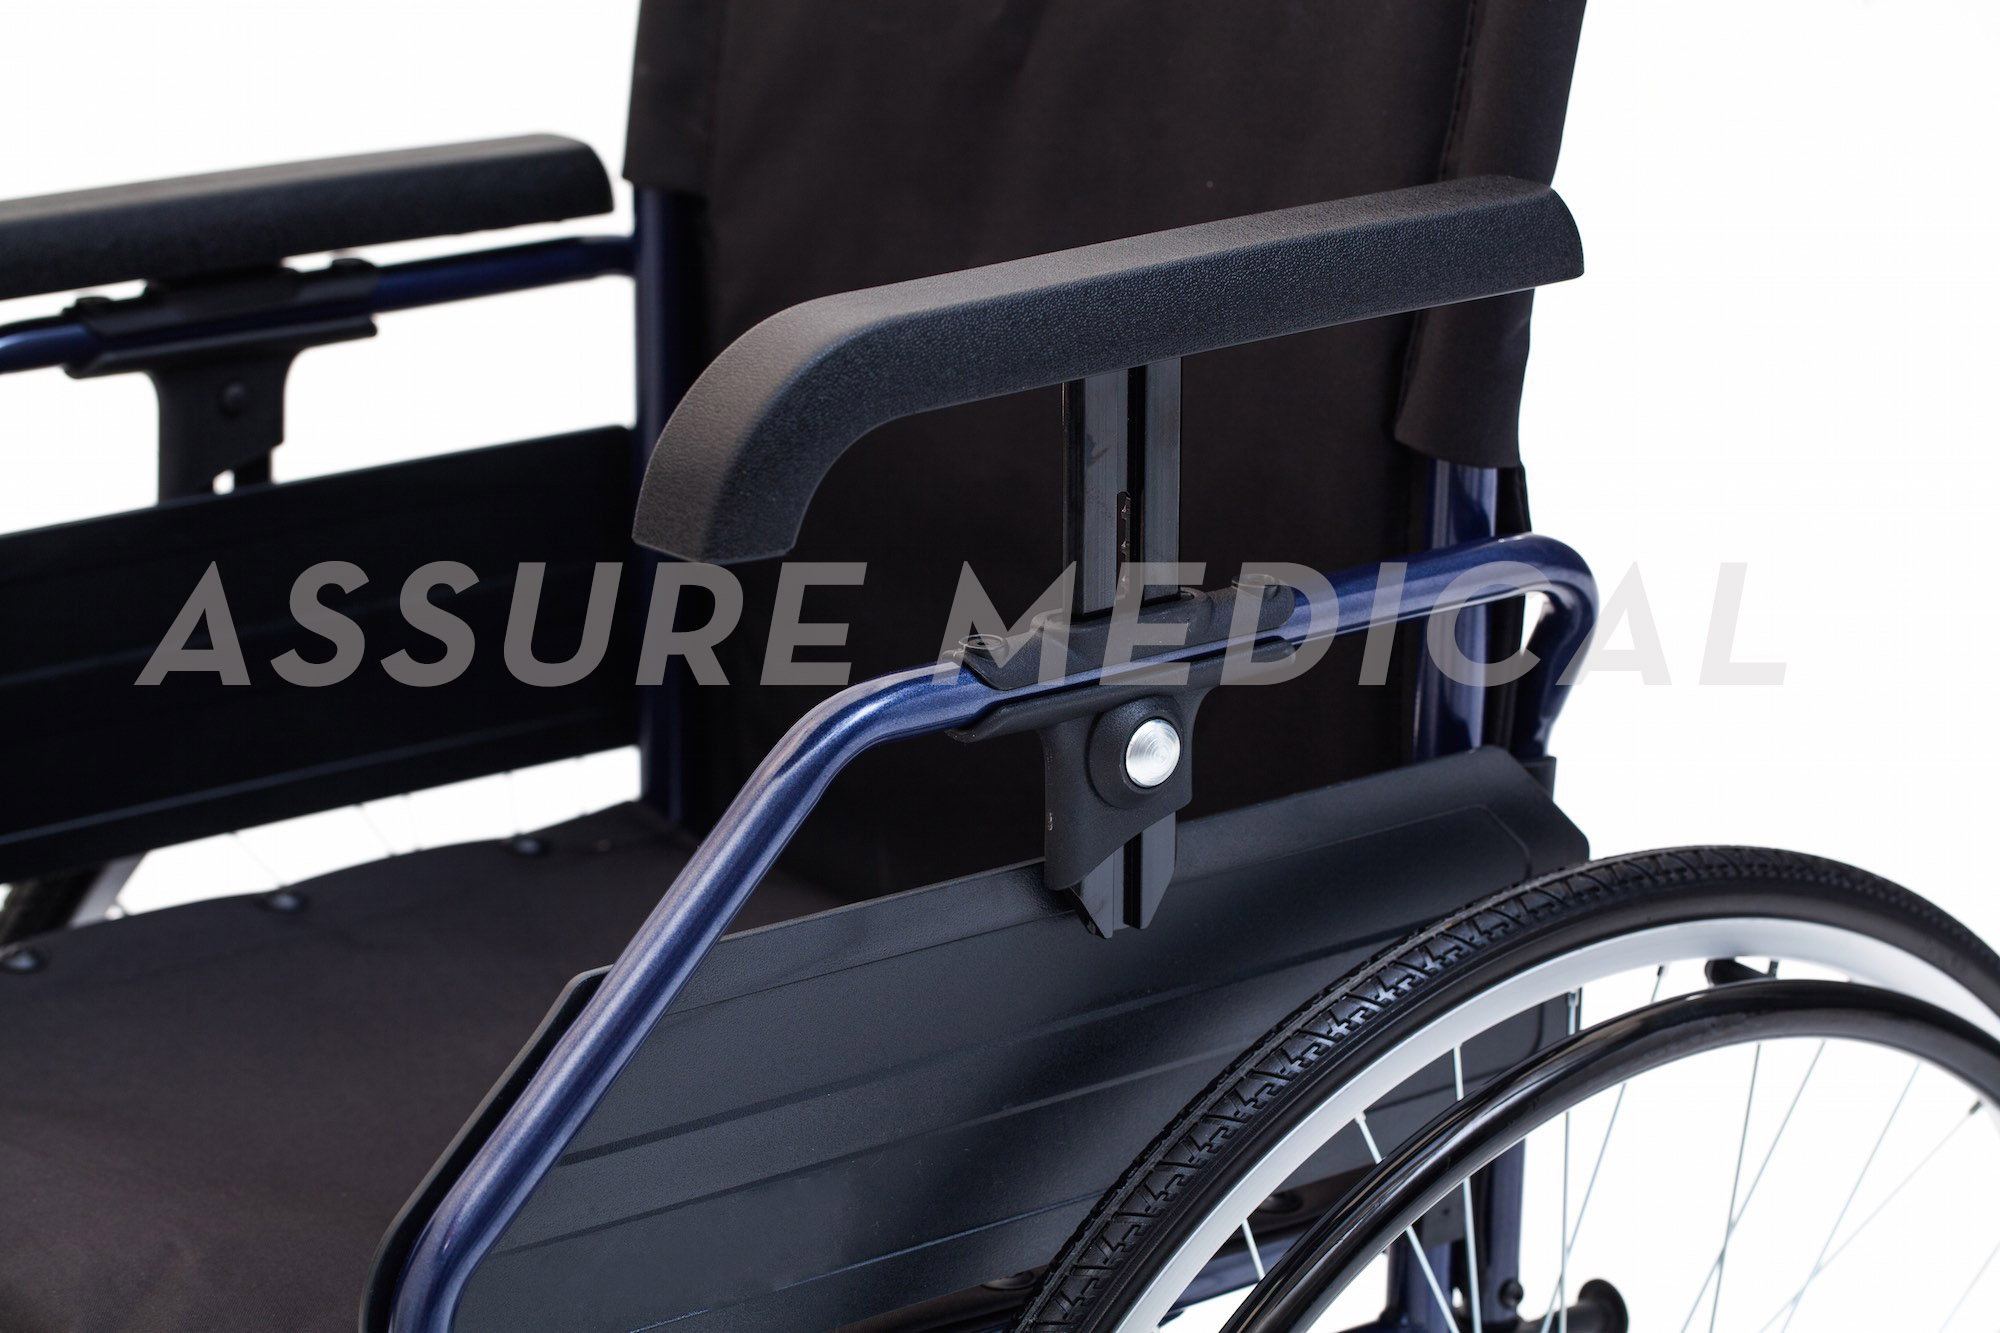 YJ-028B Steel Transit Wheelchair with height adjustable armrest for Elderly People